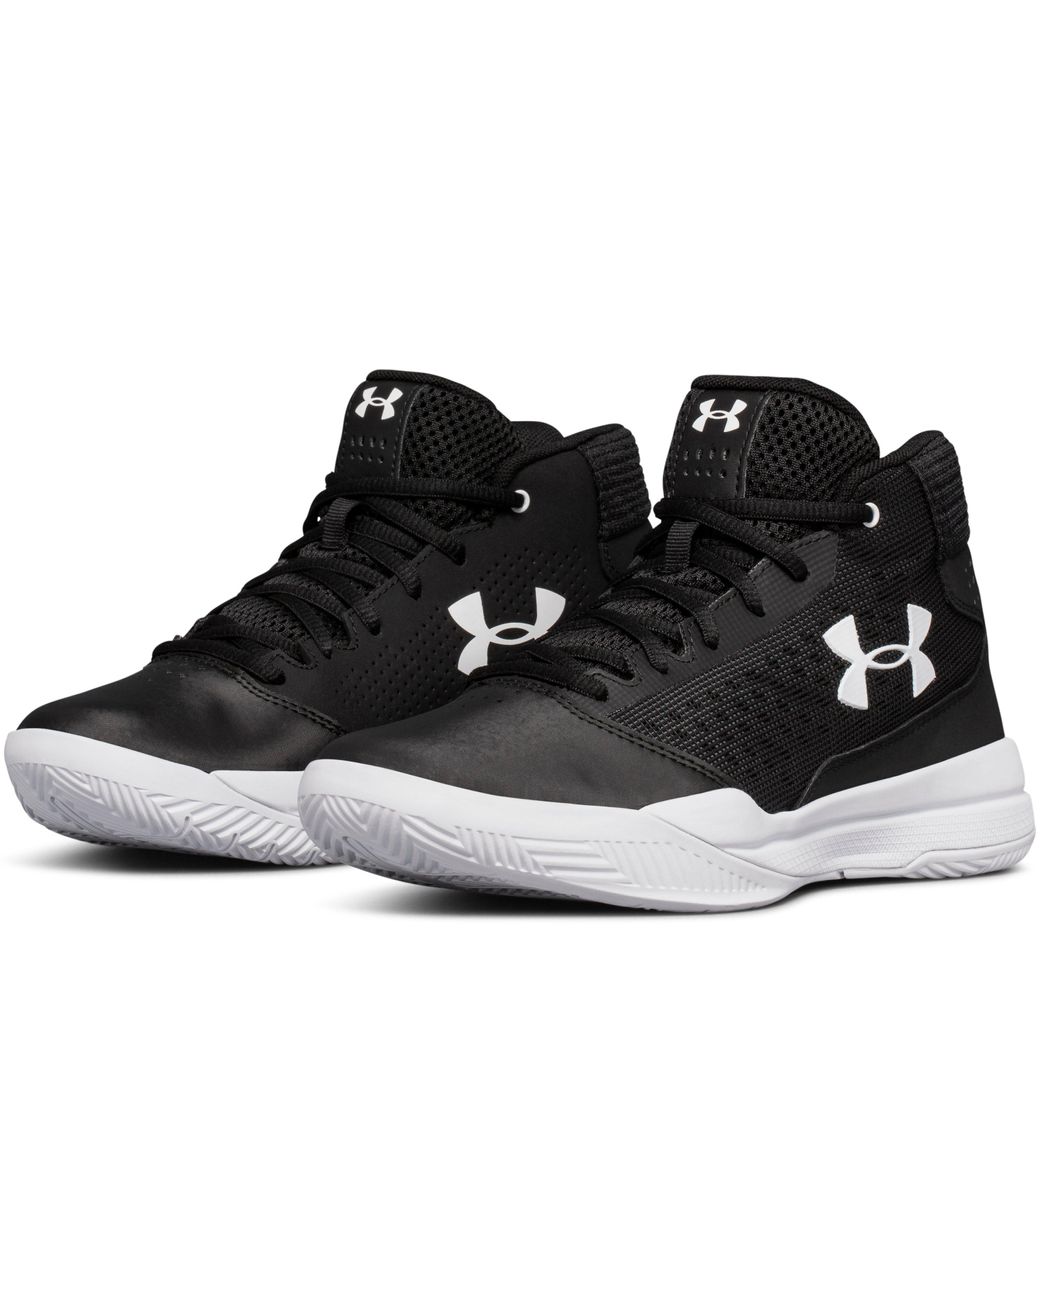 Under Armour Women's Ua Jet 2017 Basketball Shoes in Black | Lyst